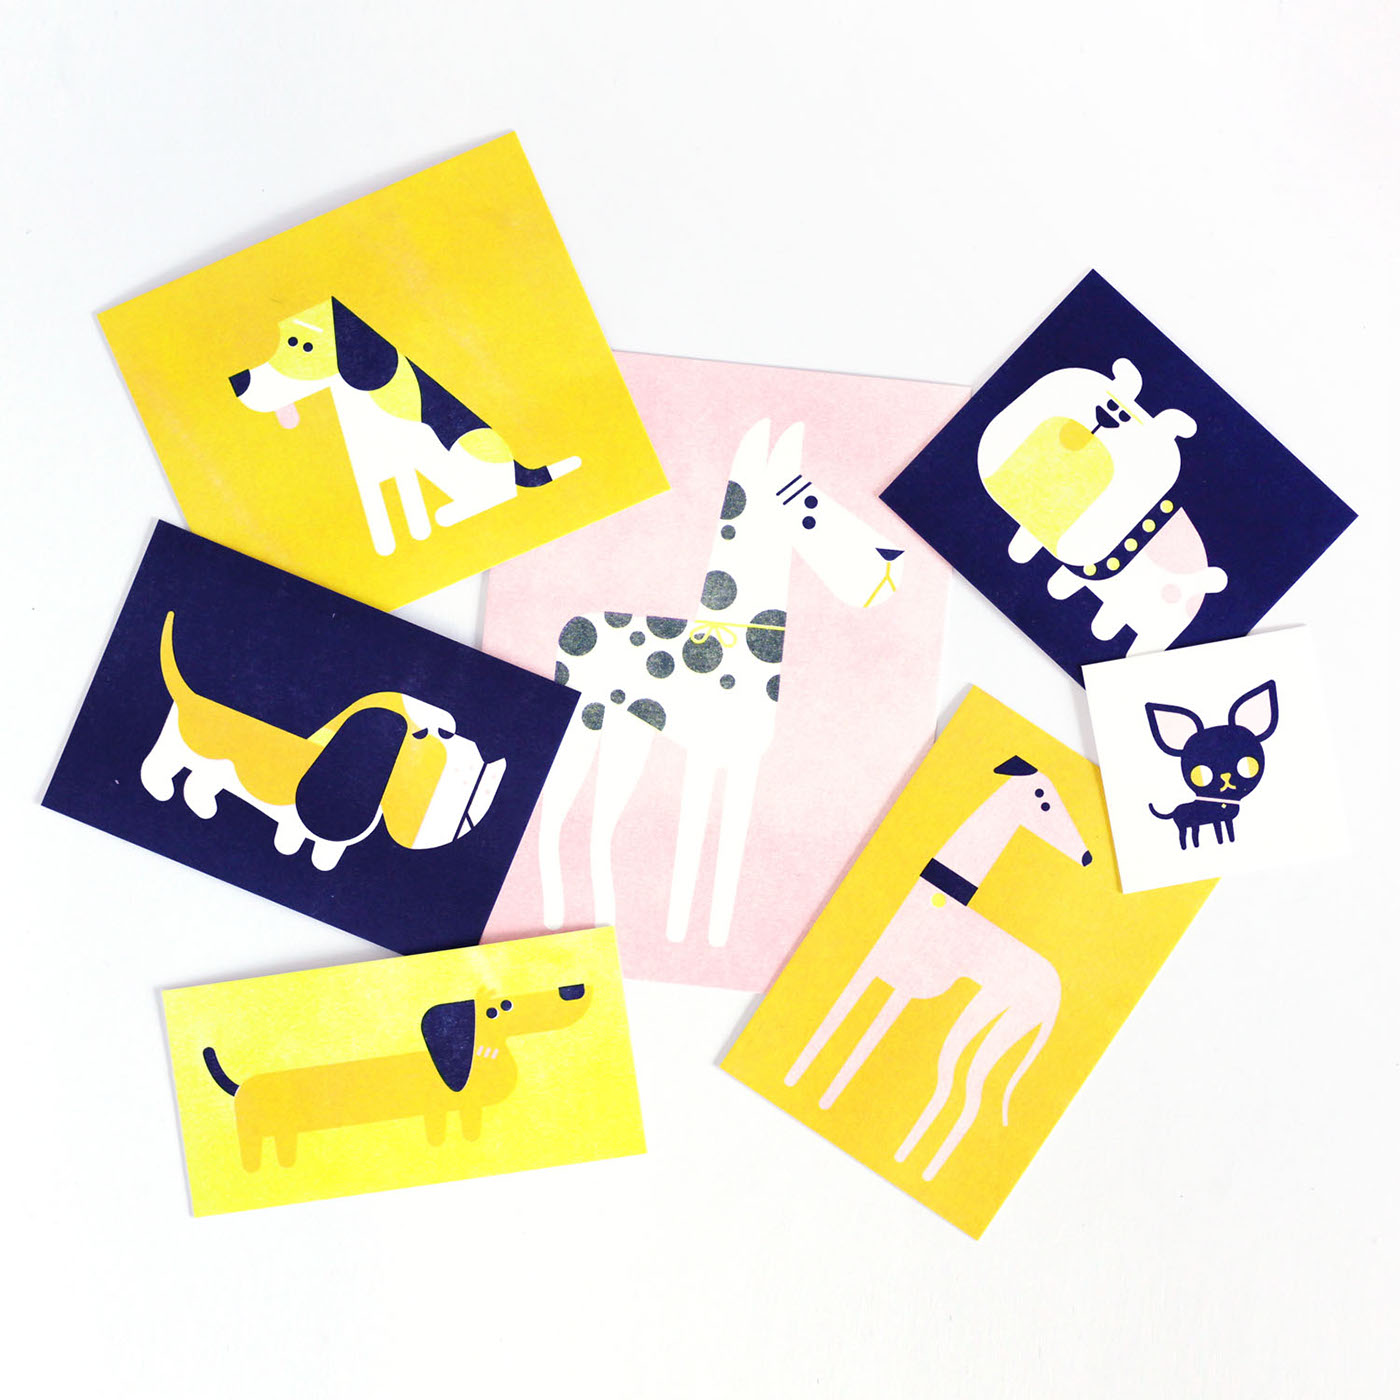 Riso Print Loulou & Tummie character desing forest illustration eyes Mushrooms dogs card illustration